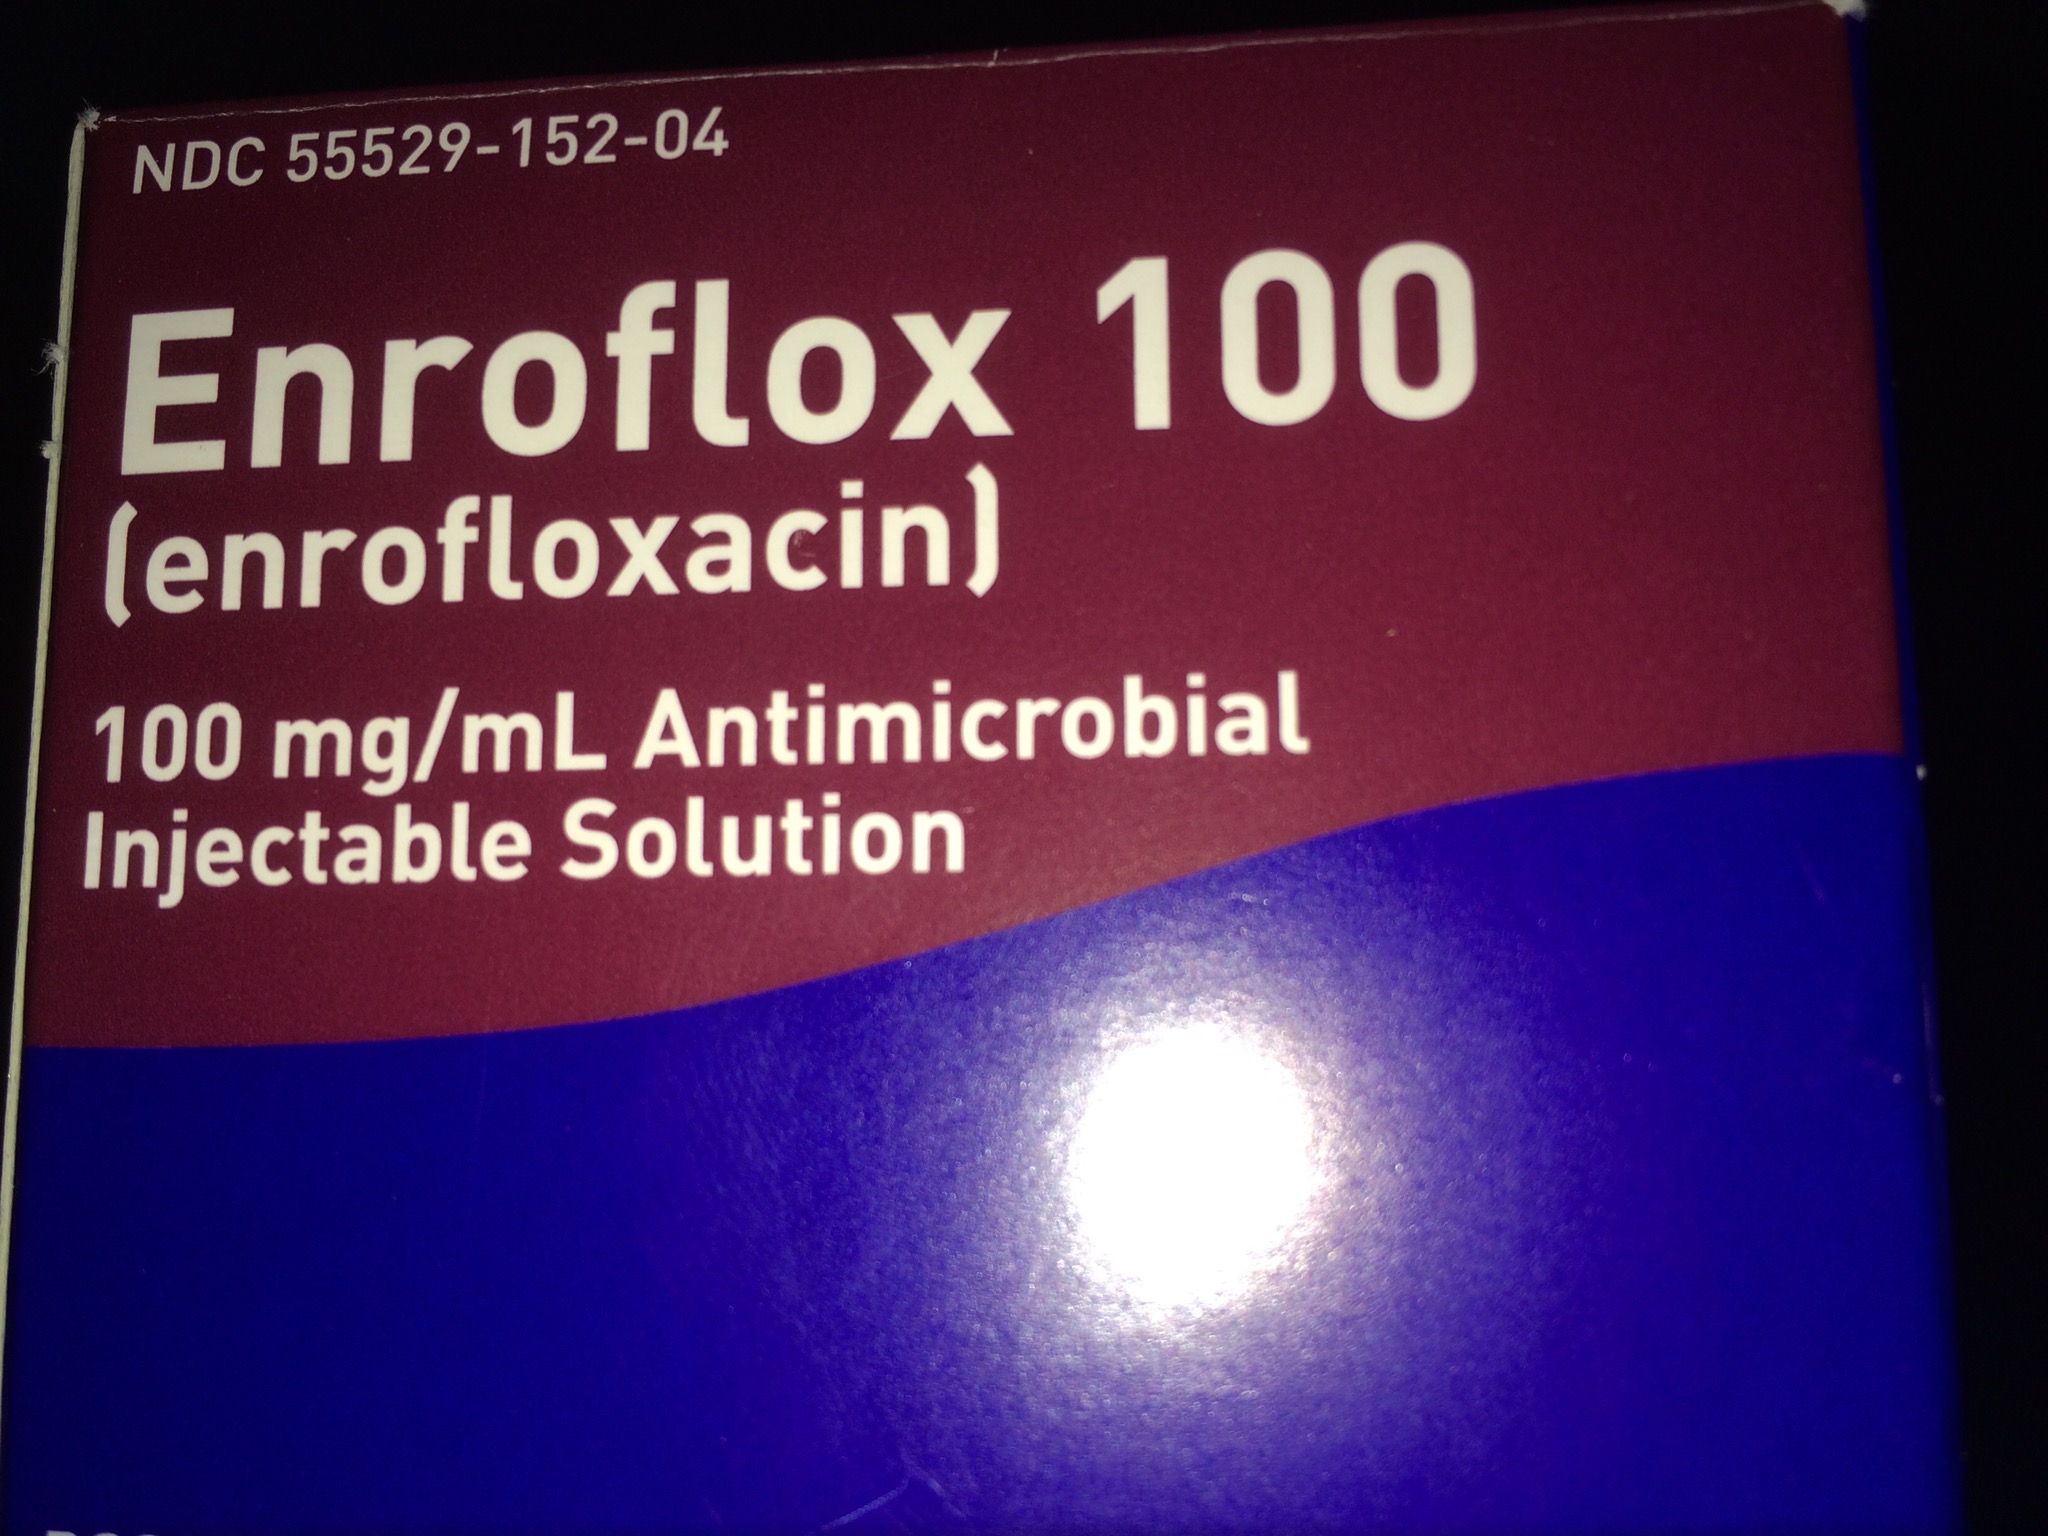 Enroflox 100 antimicrobial from Summit Equine in Apex